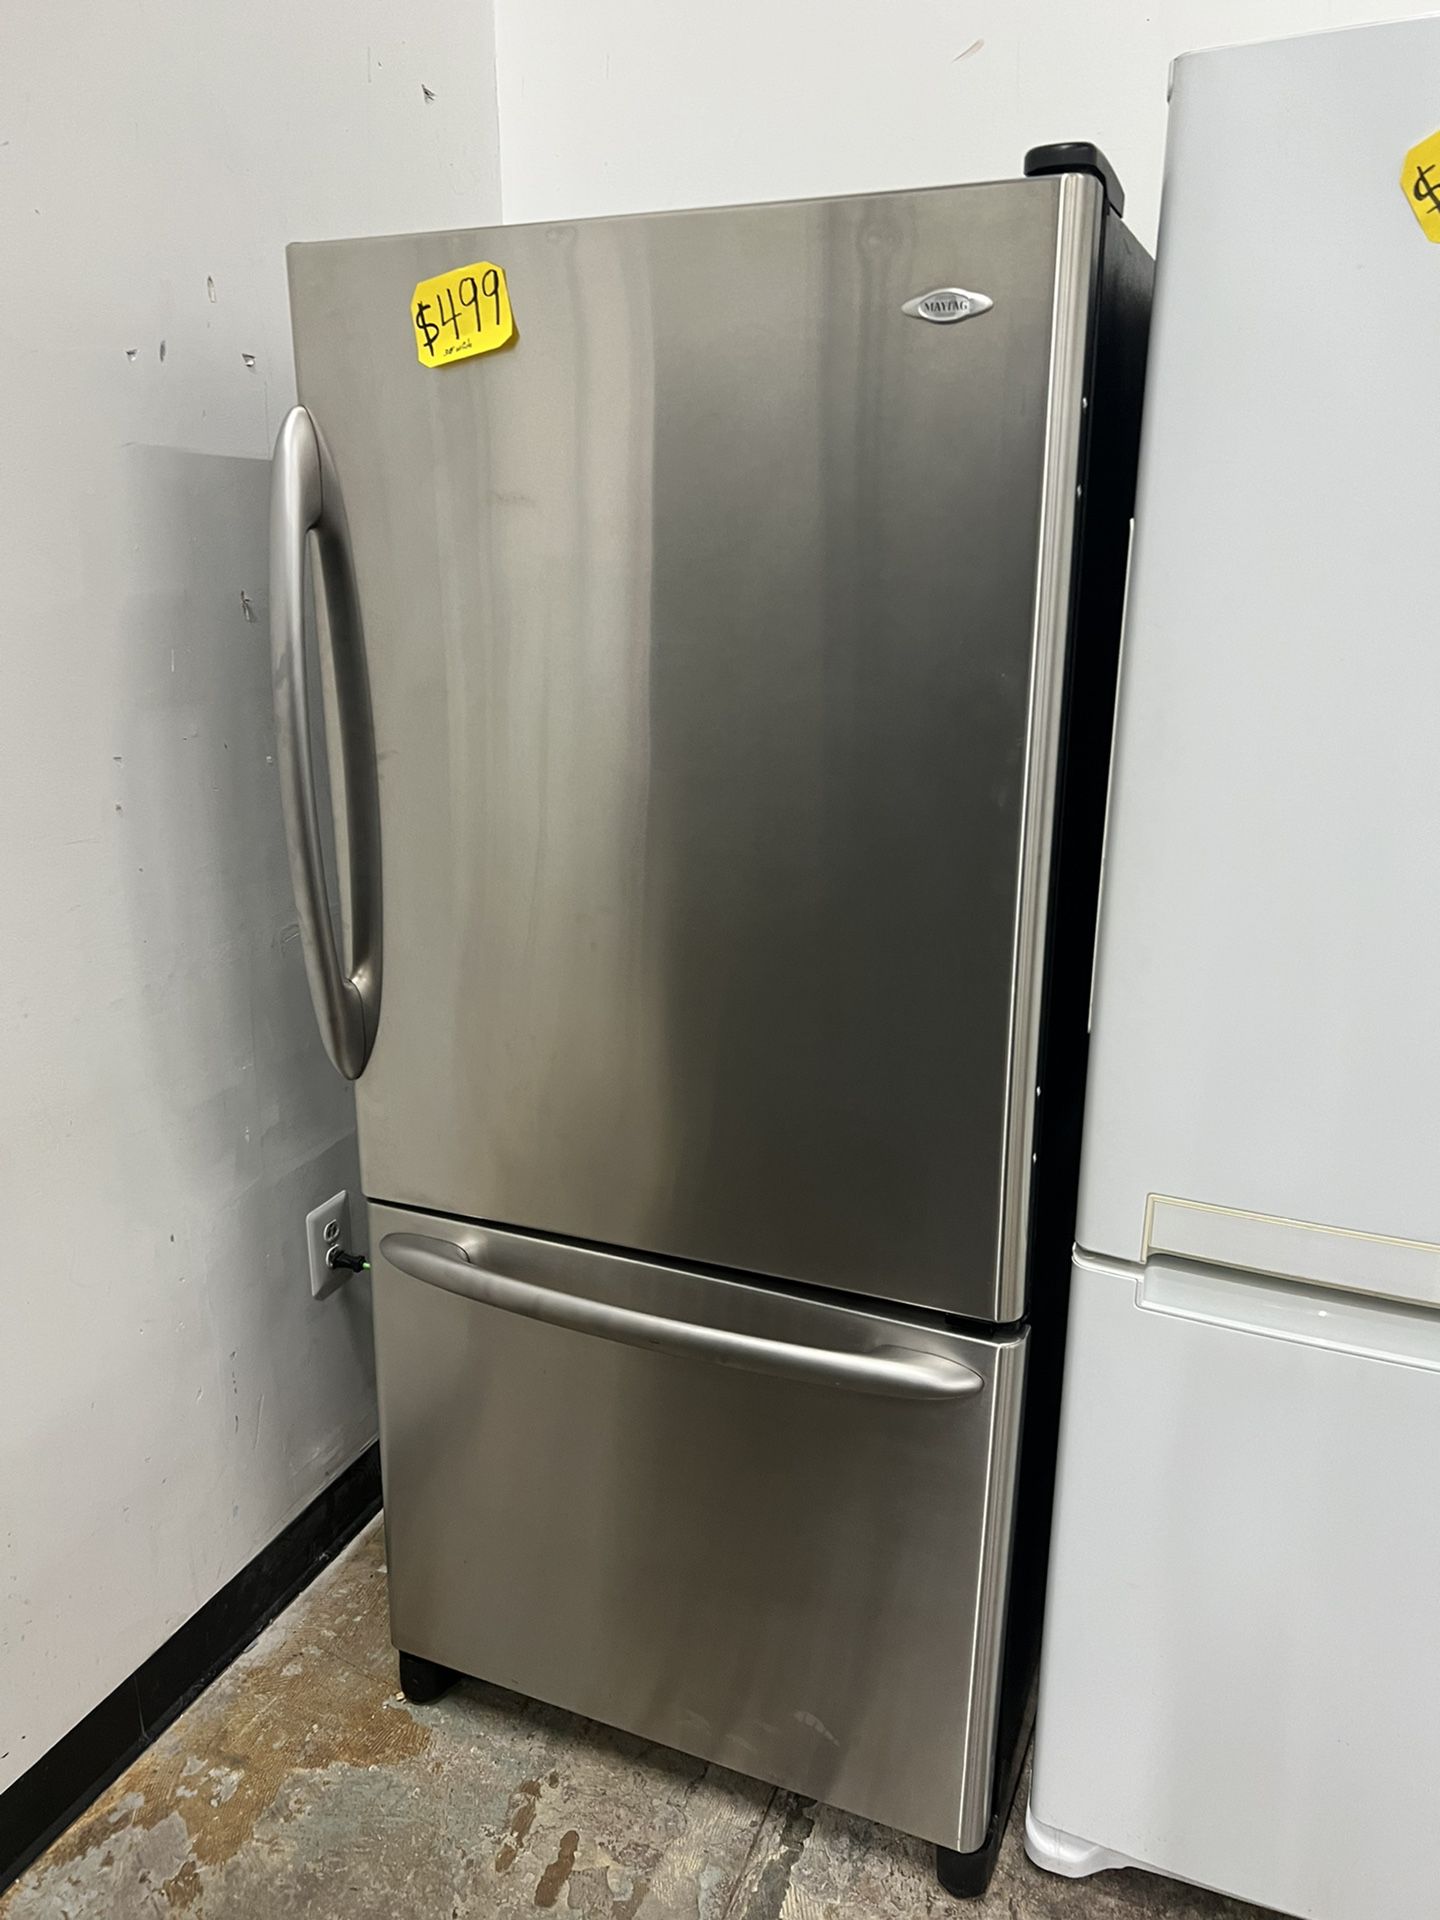 Maytag 30” Wide Bottom Freezer Stainless Steel Refrigerator In Great Condition 